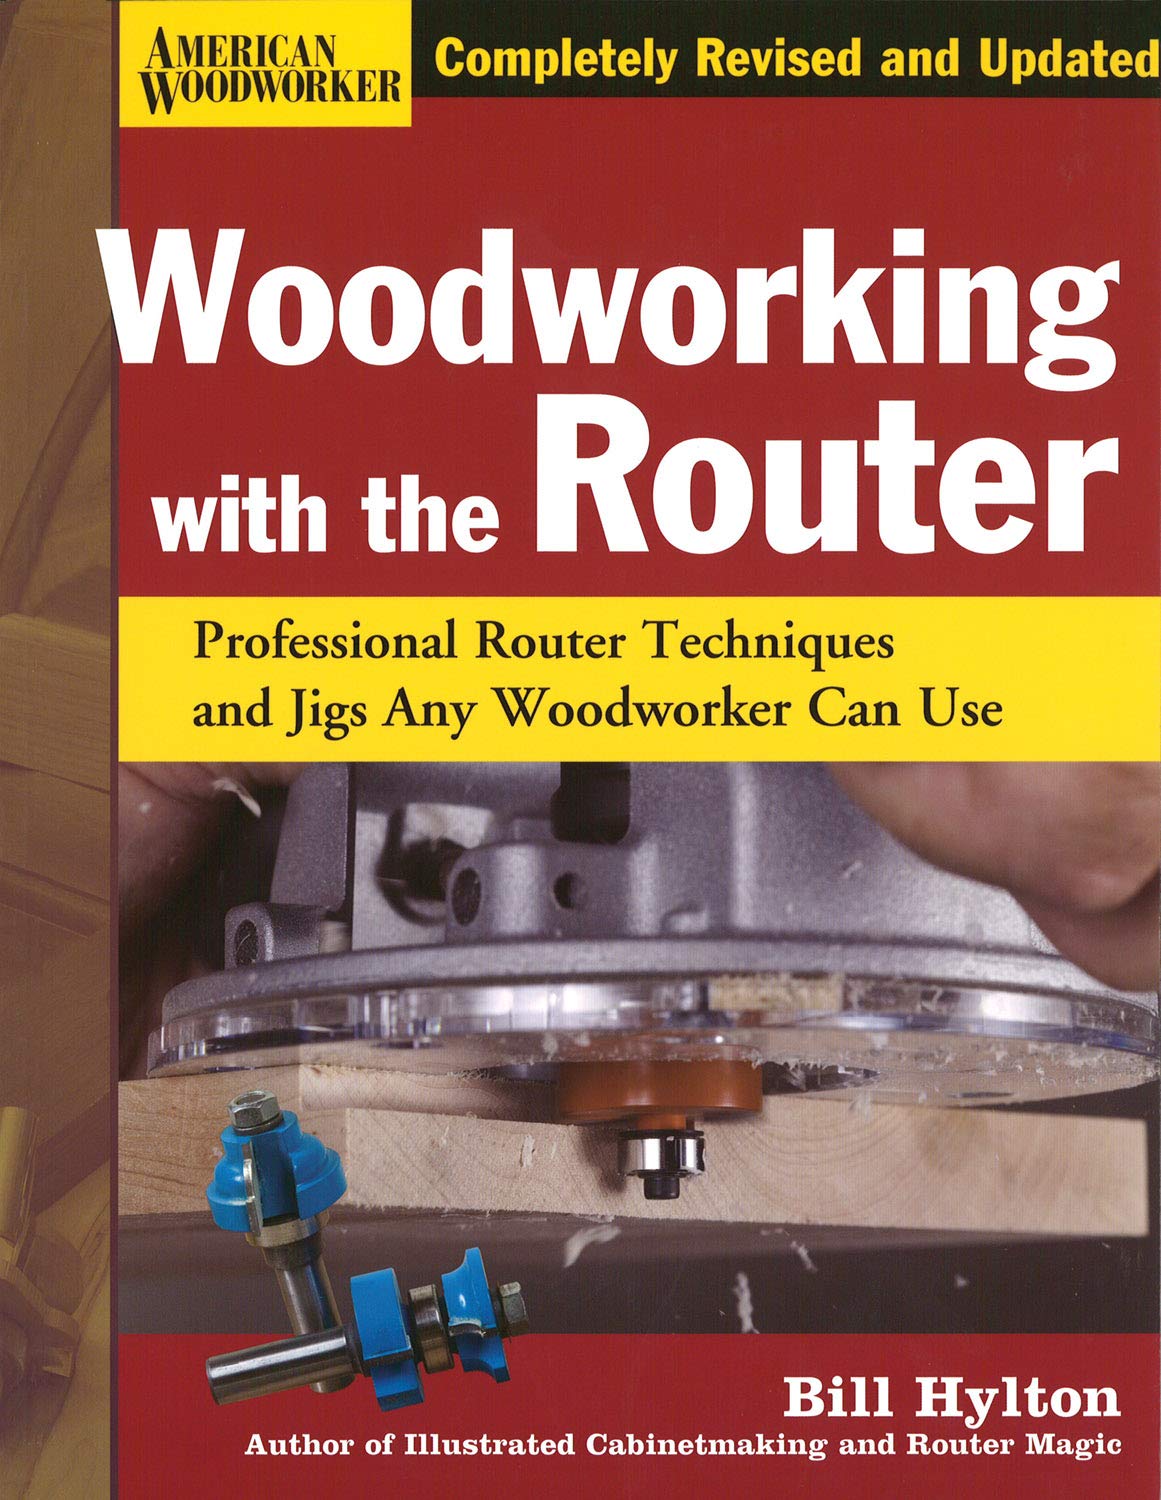 Woodworking with the Router: Professional Router Techniques and Jigs